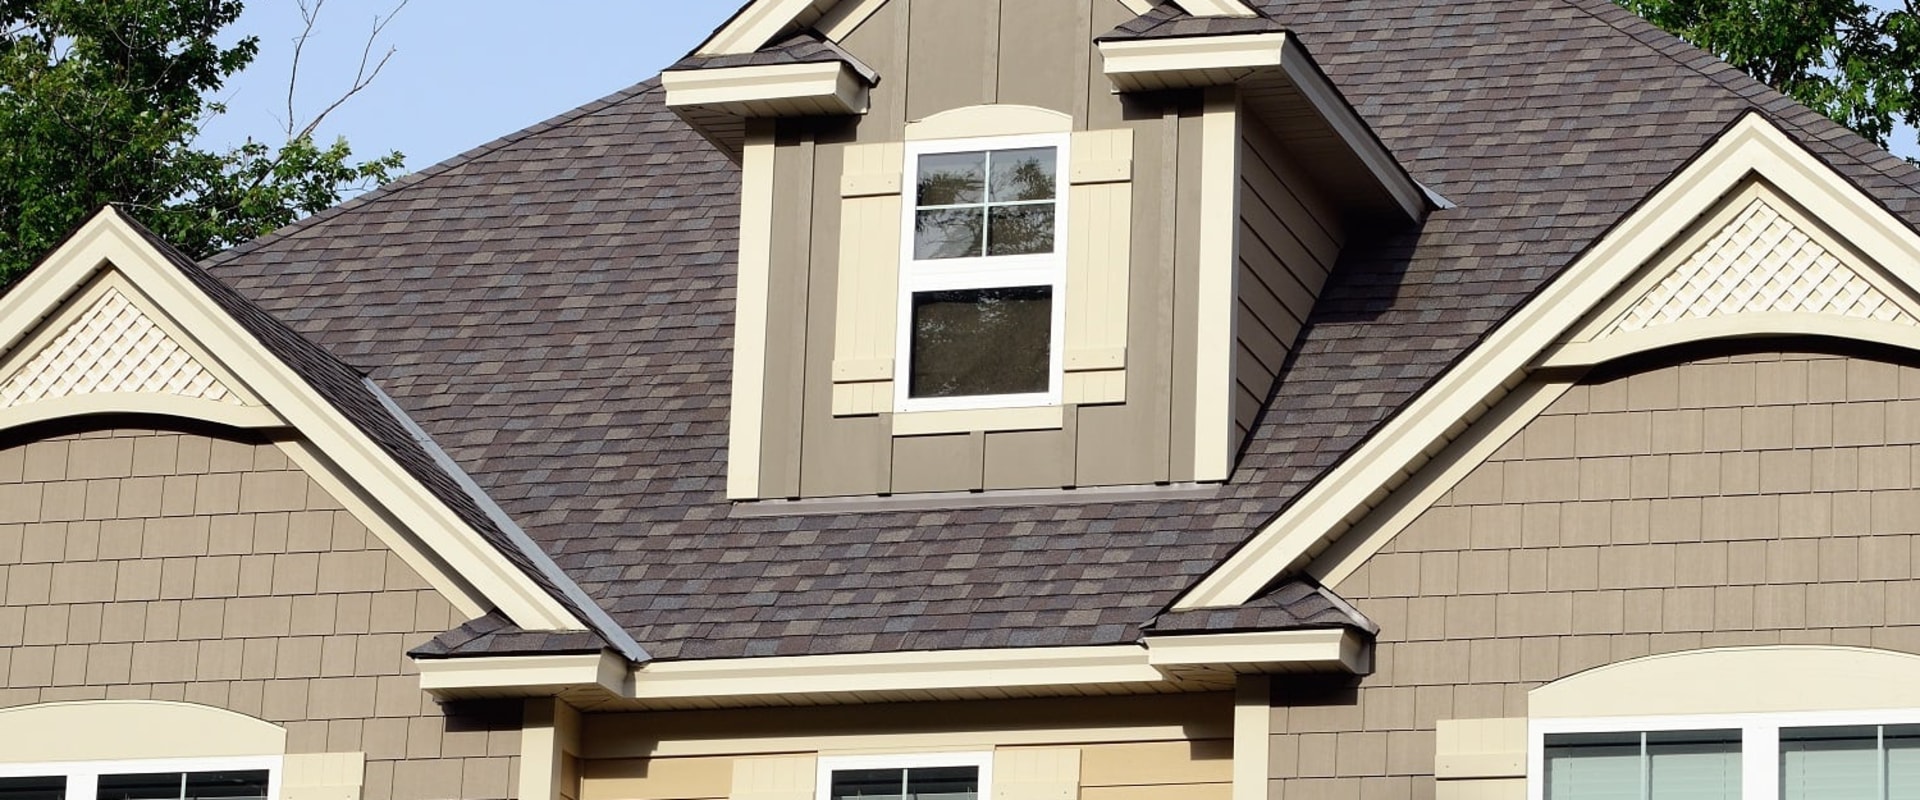 How many bundles of shingles does it take to cover 2000 square feet?